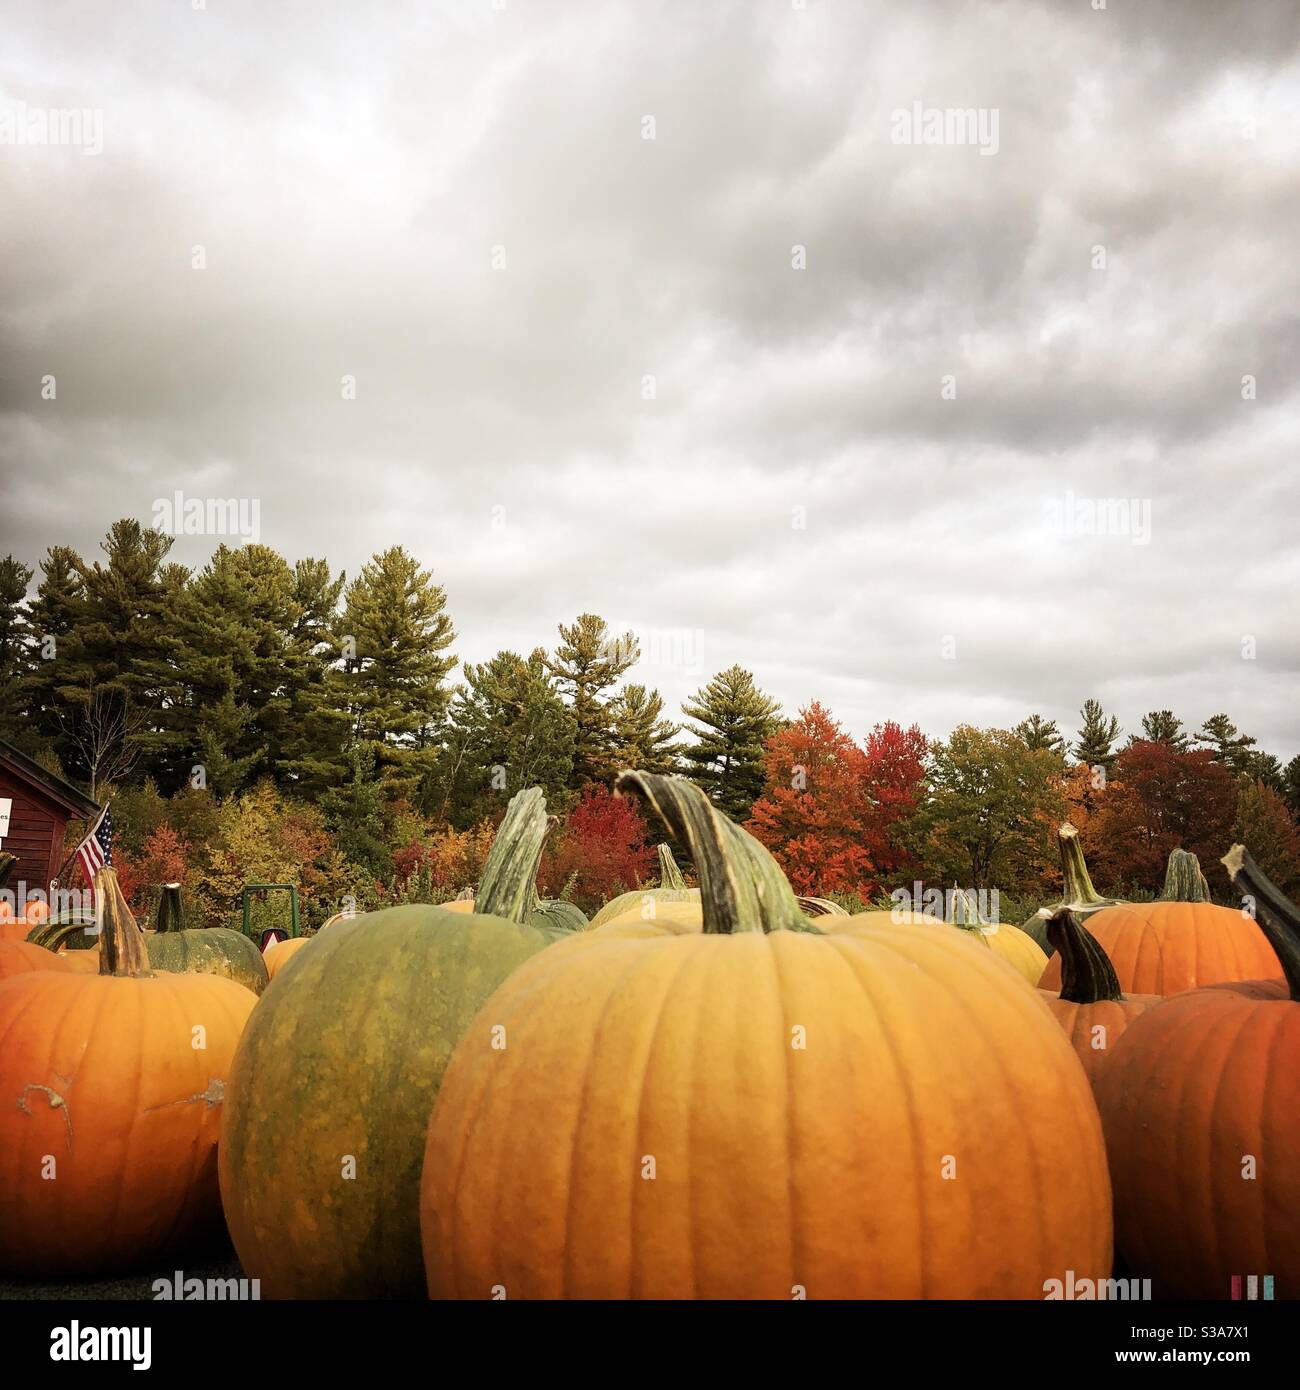 Pumpkins on a farm with fall foliage in the background Stock Photo